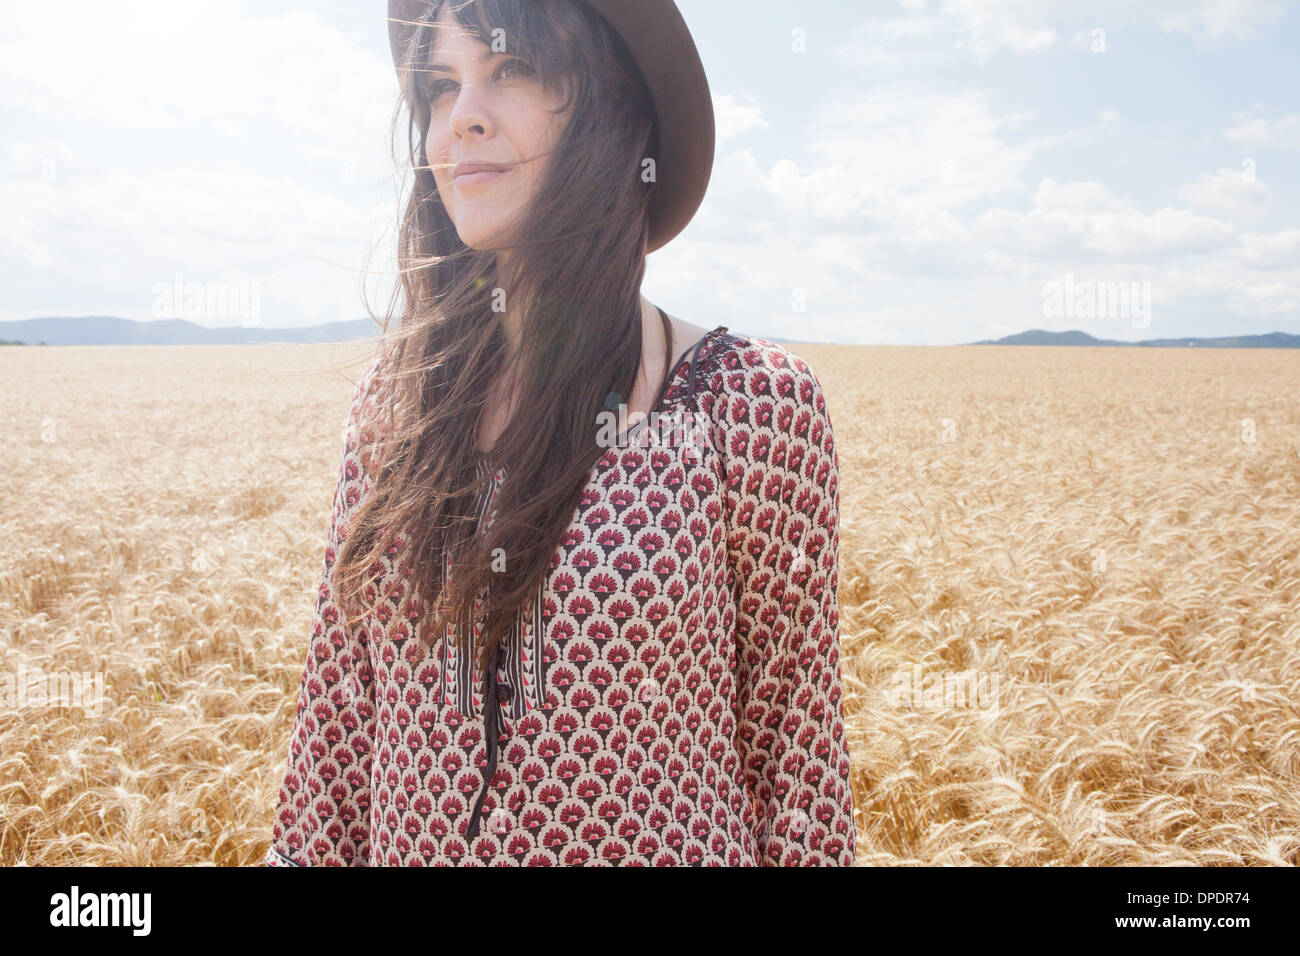 Mid adult woman standing in wheat field Stock Photo